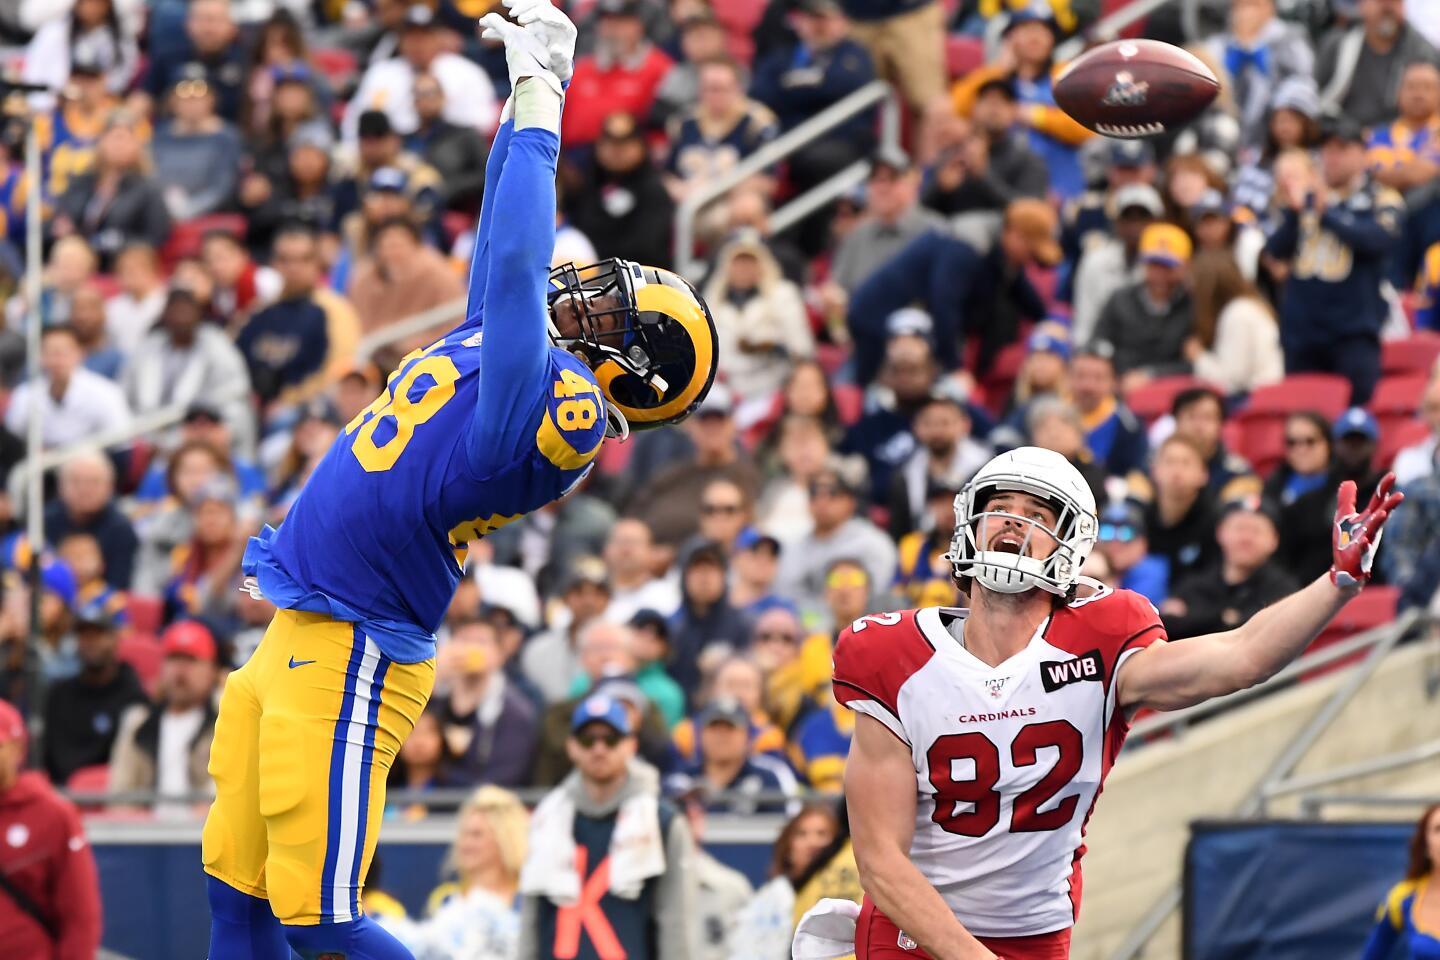 Rams linebacker Travin Howard deflects a pass in the end zone intended for Arizona Cardinals tight end Dan Arnold during the second quarter.